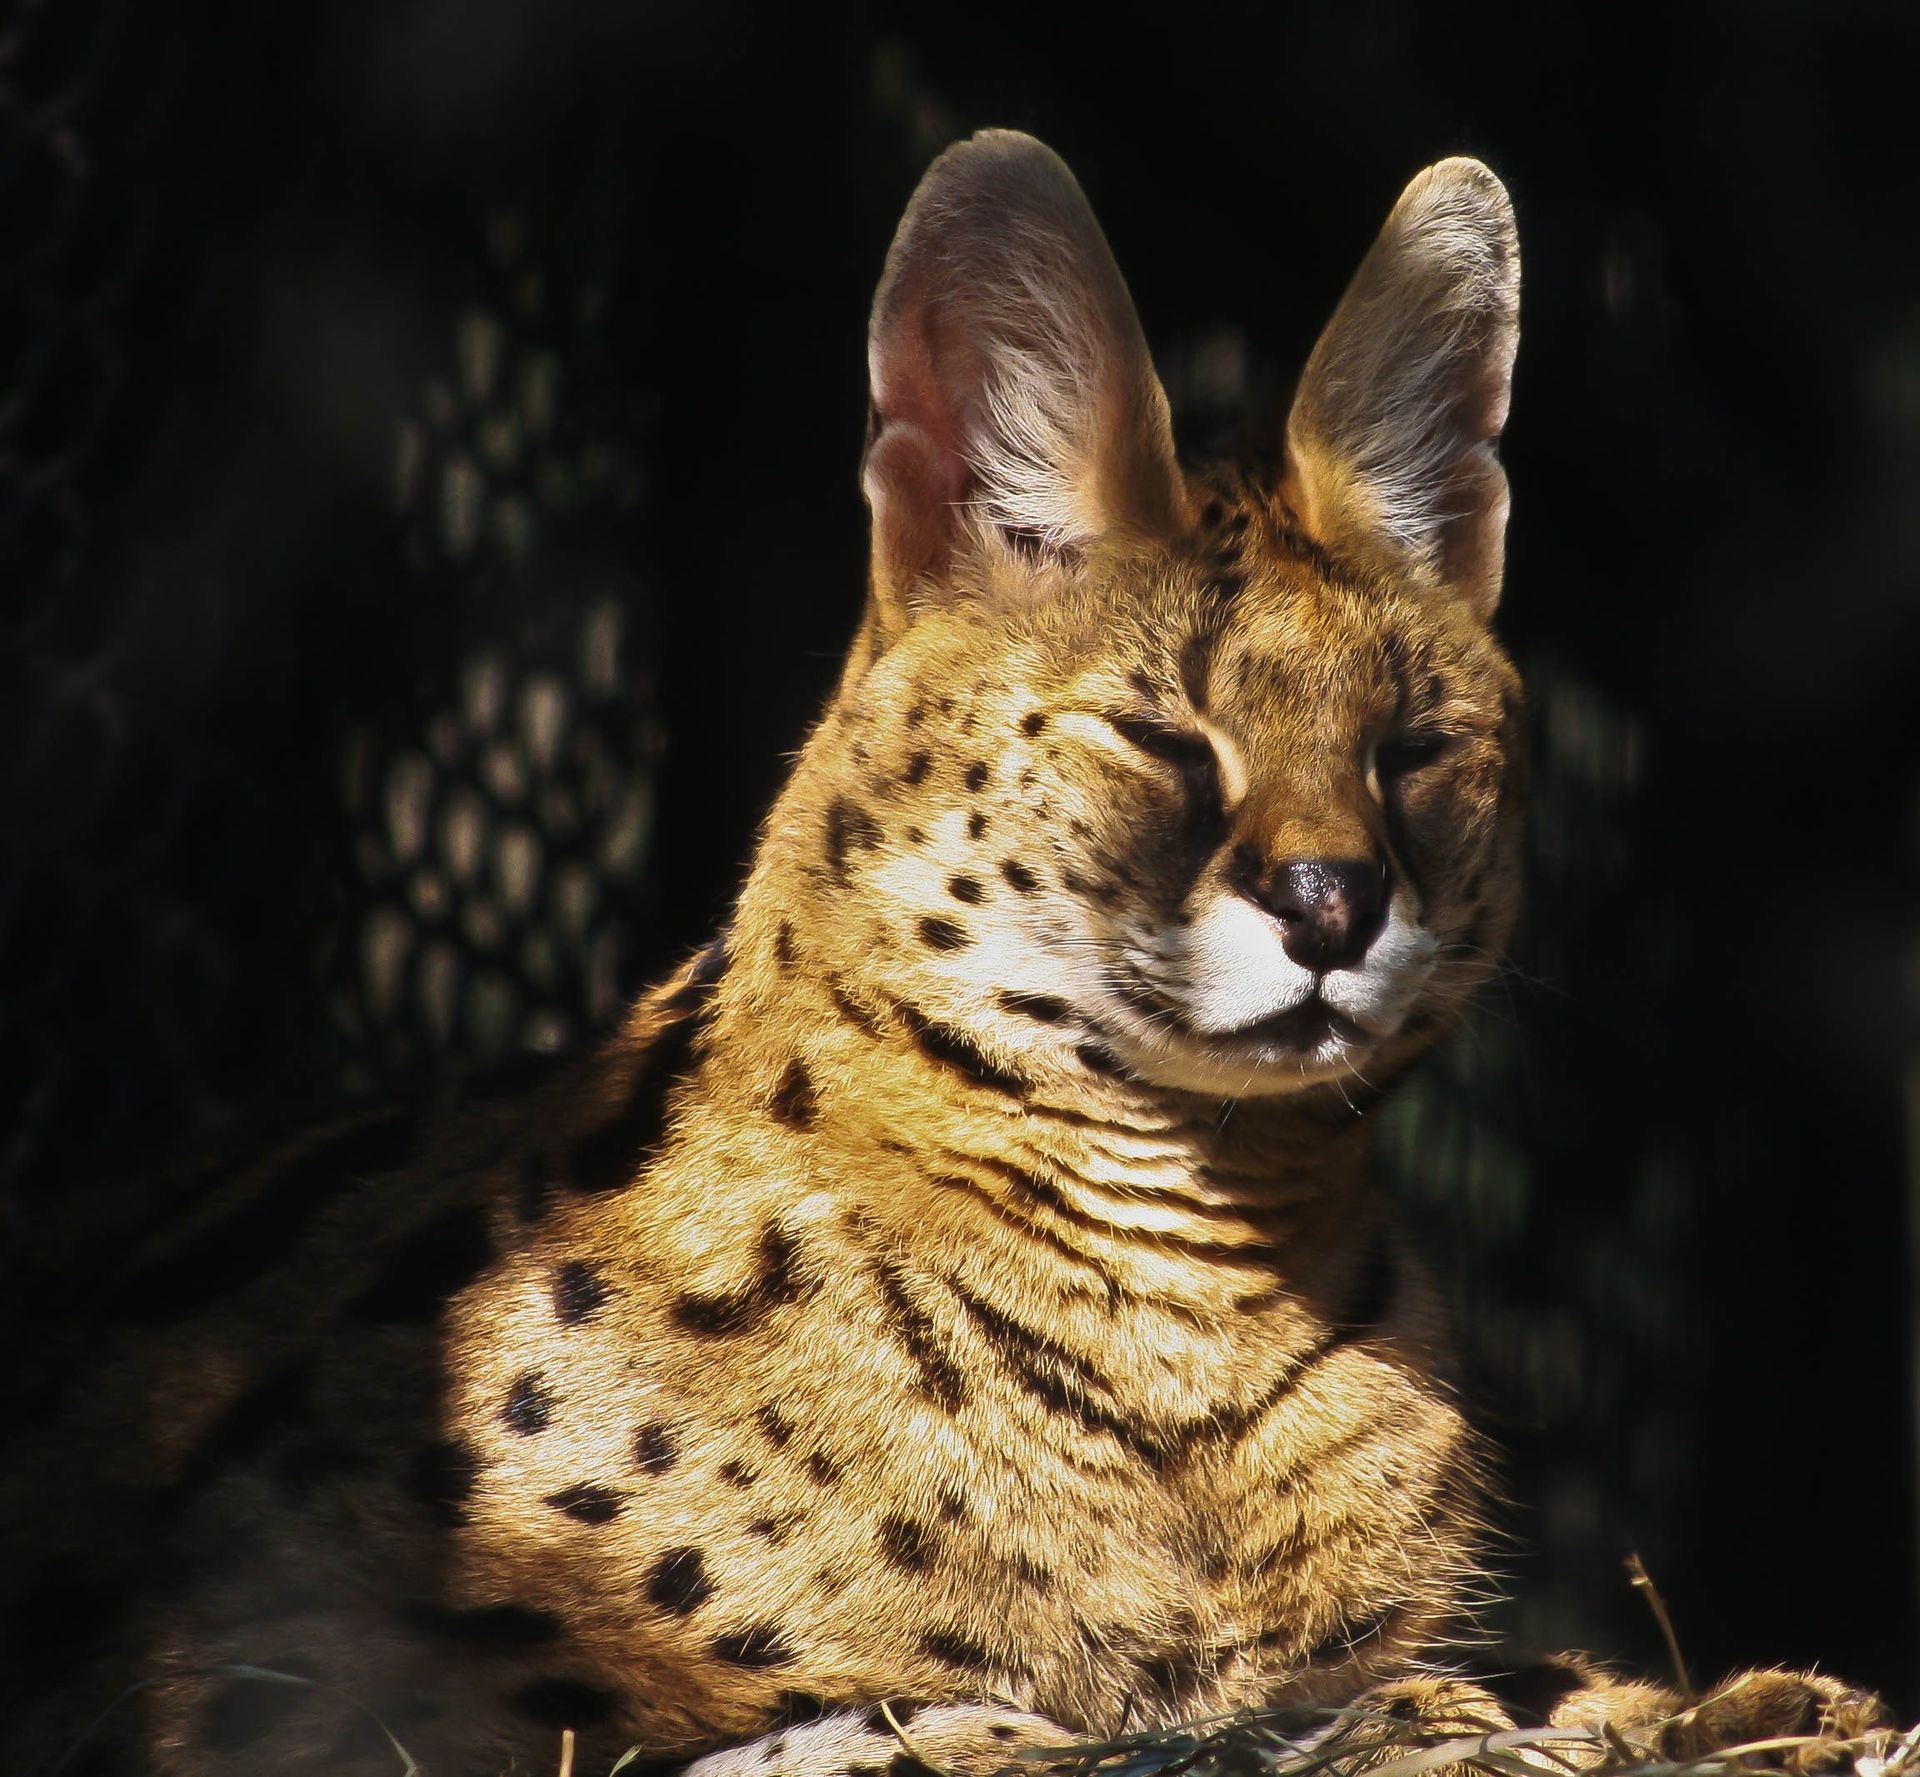 An image of a serval, an African wildcat, lying down.